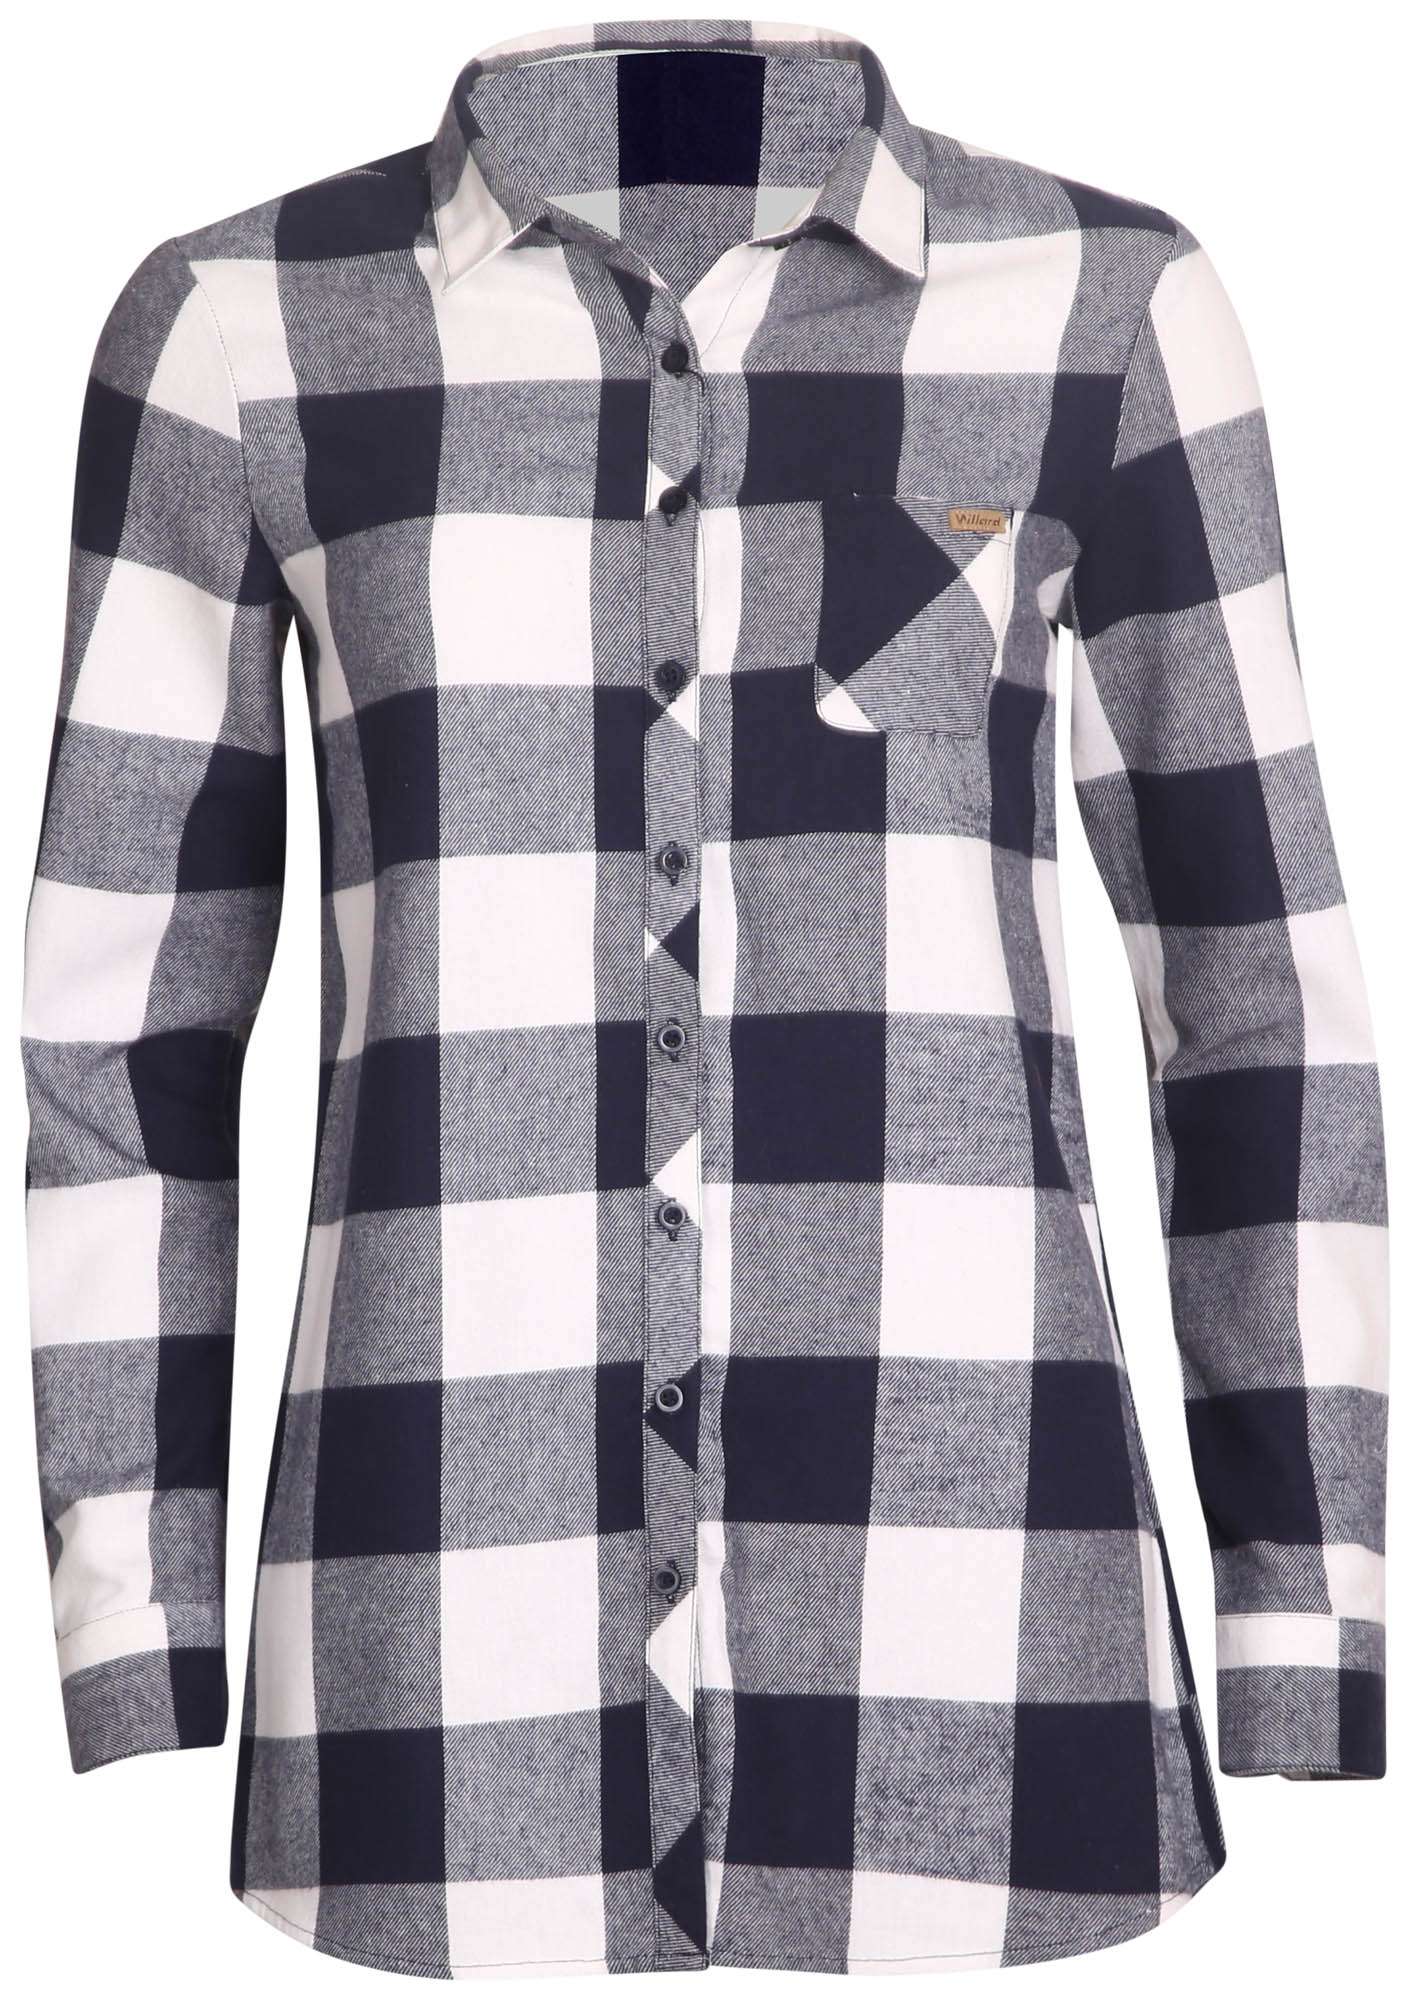 Damenbluse Flanell